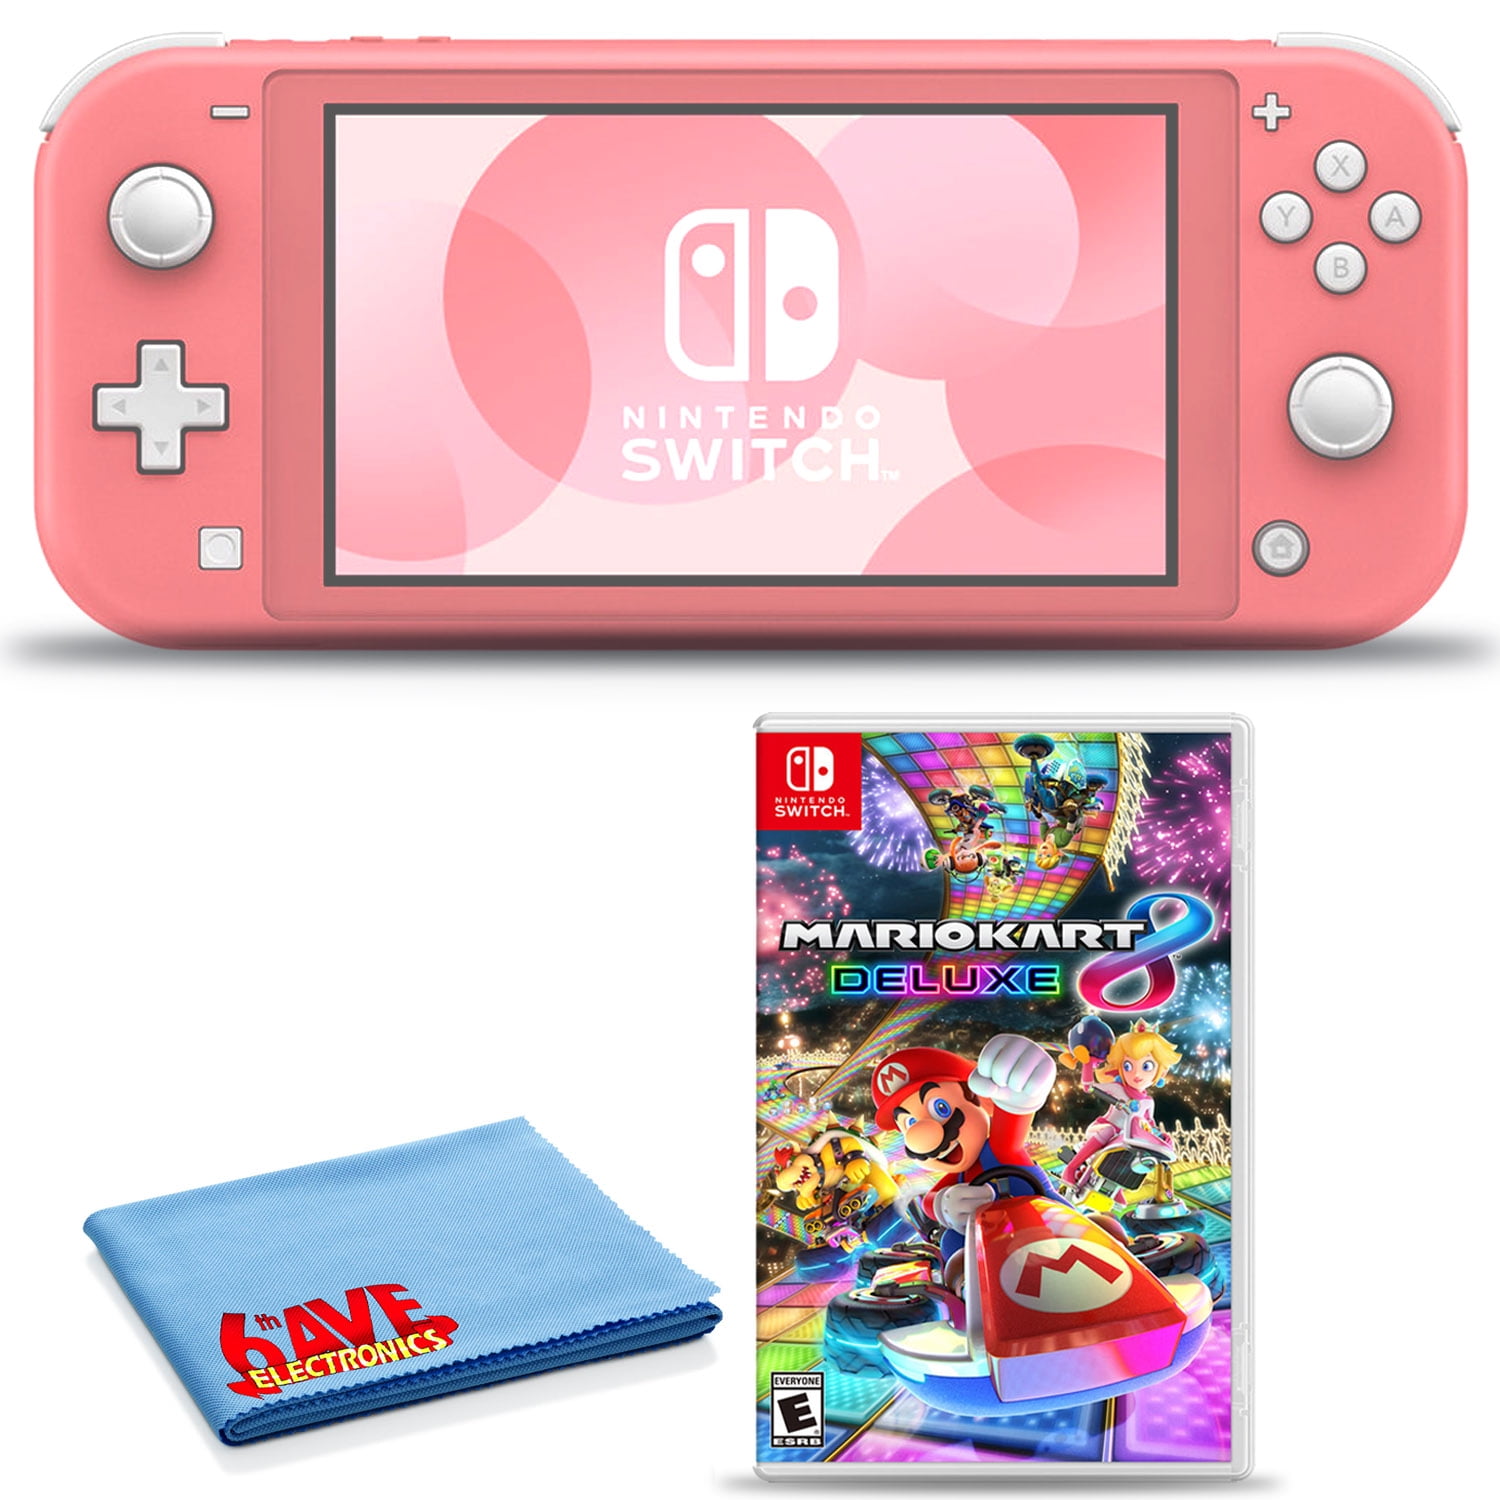 Nintendo Switch Lite (Turquoise) Bundle with Mario Kart 8 and 6Ave 